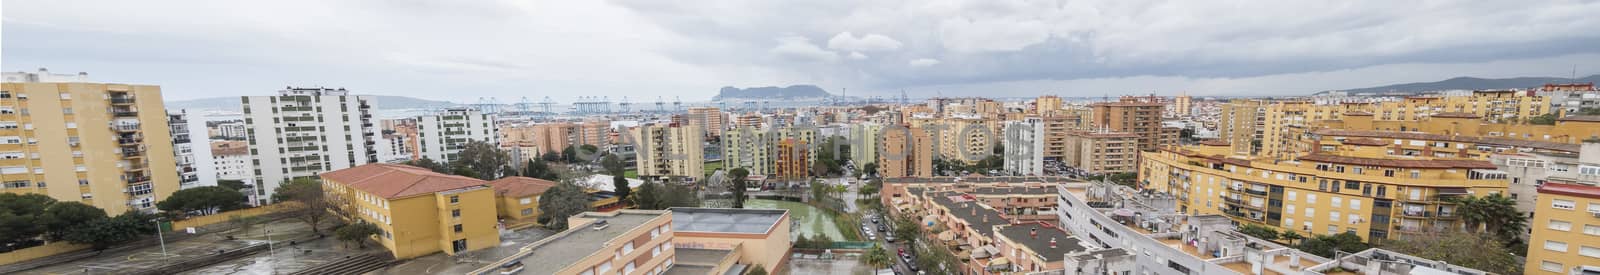 Panoramic view of Algeciras, the port and the rock of gibraltar, by max8xam